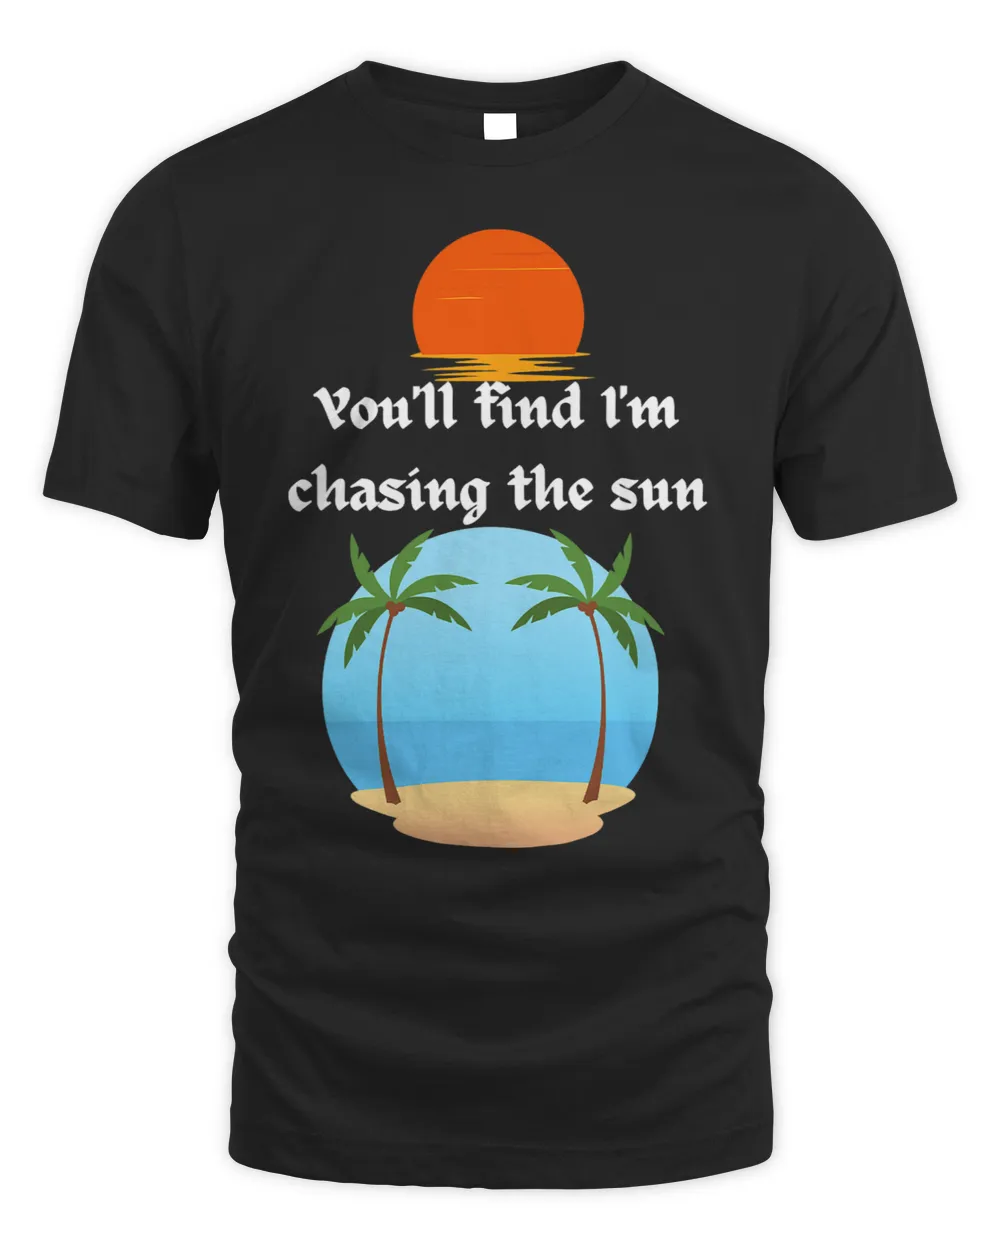 The great search for the sun humor funny holiday humor